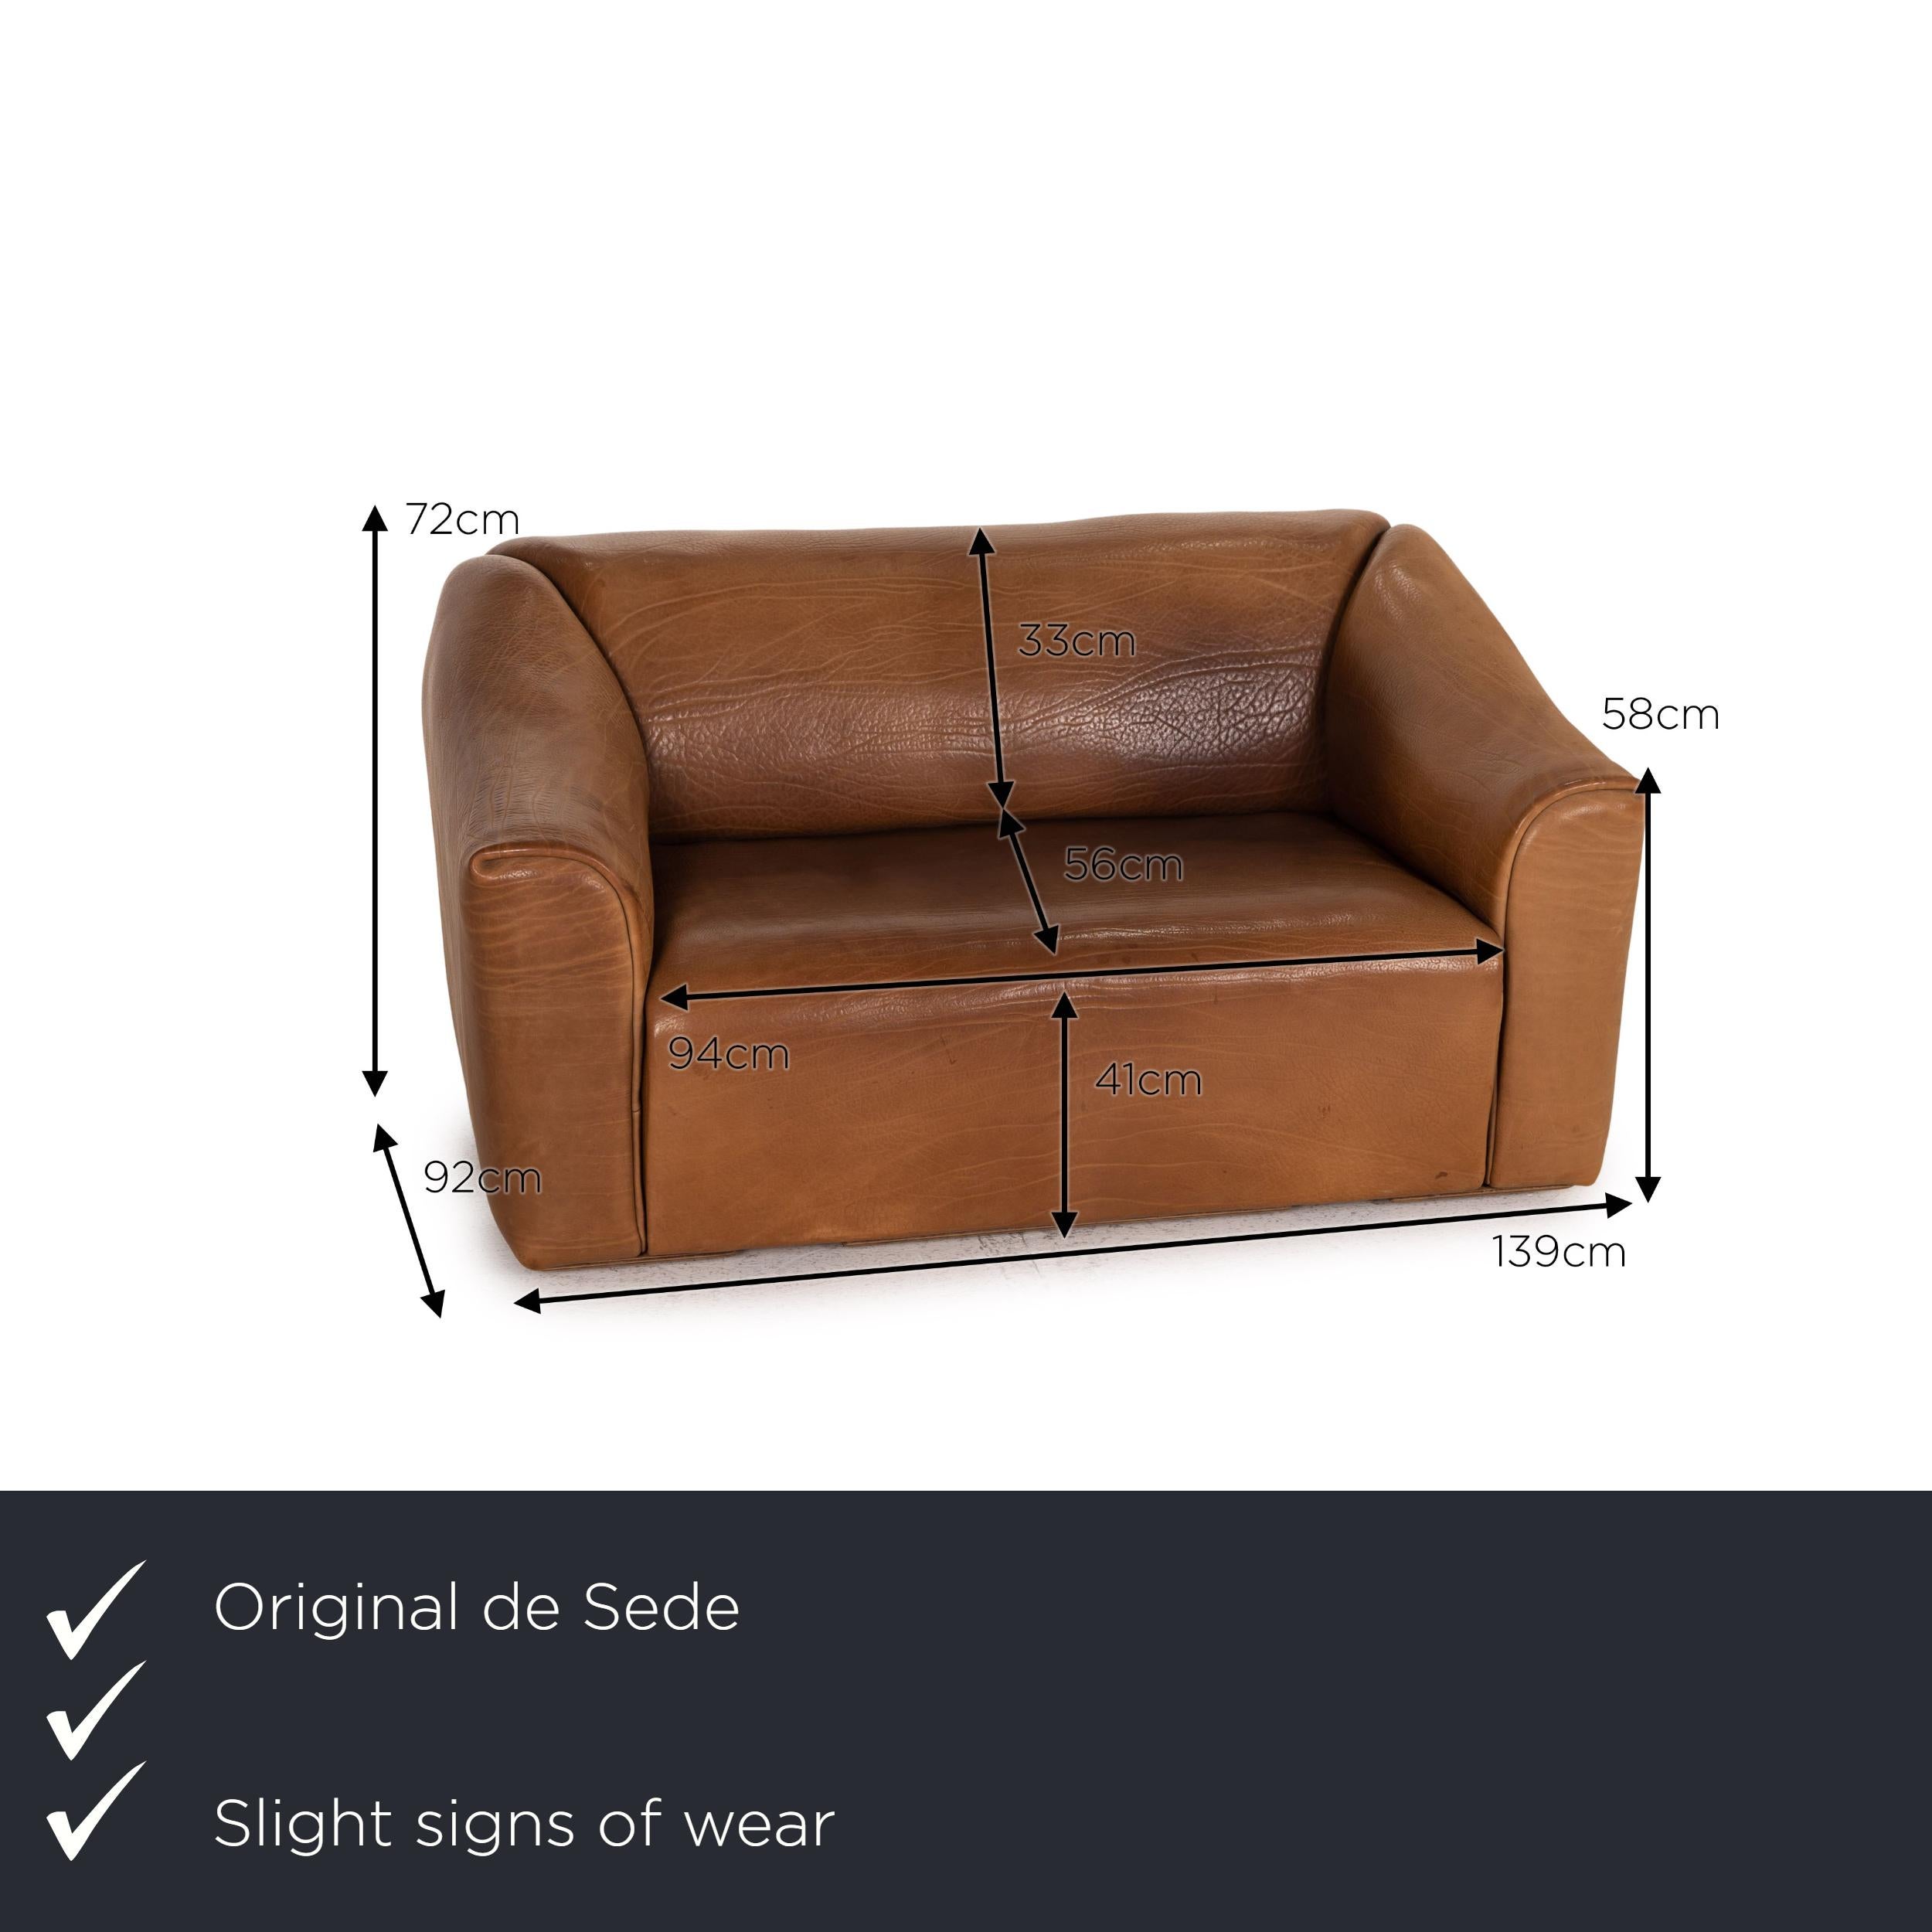 We present to you a de Sede DS 47 leather sofa brown two-seater function vintage couch.
  
 

 Product measurements in centimeters:
 

 depth: 92
 width: 139
 height: 72
 seat height: 41
 rest height: 58
 seat depth: 56
 seat width: